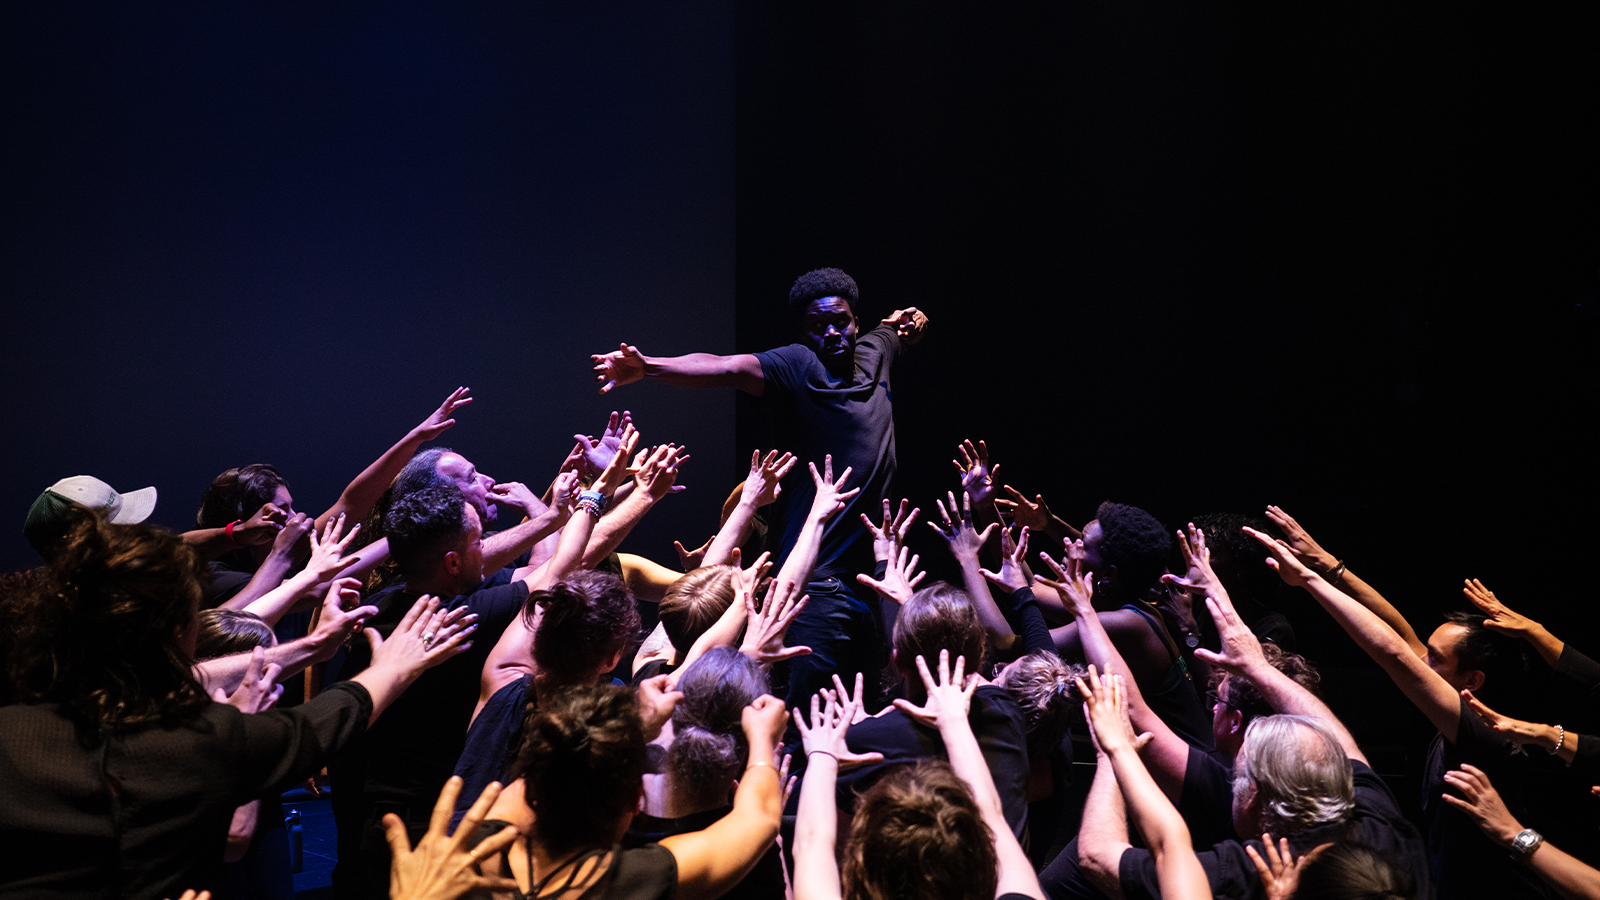 Dozens of outstretched hands reach out toward a Black performer obscured by shadow.